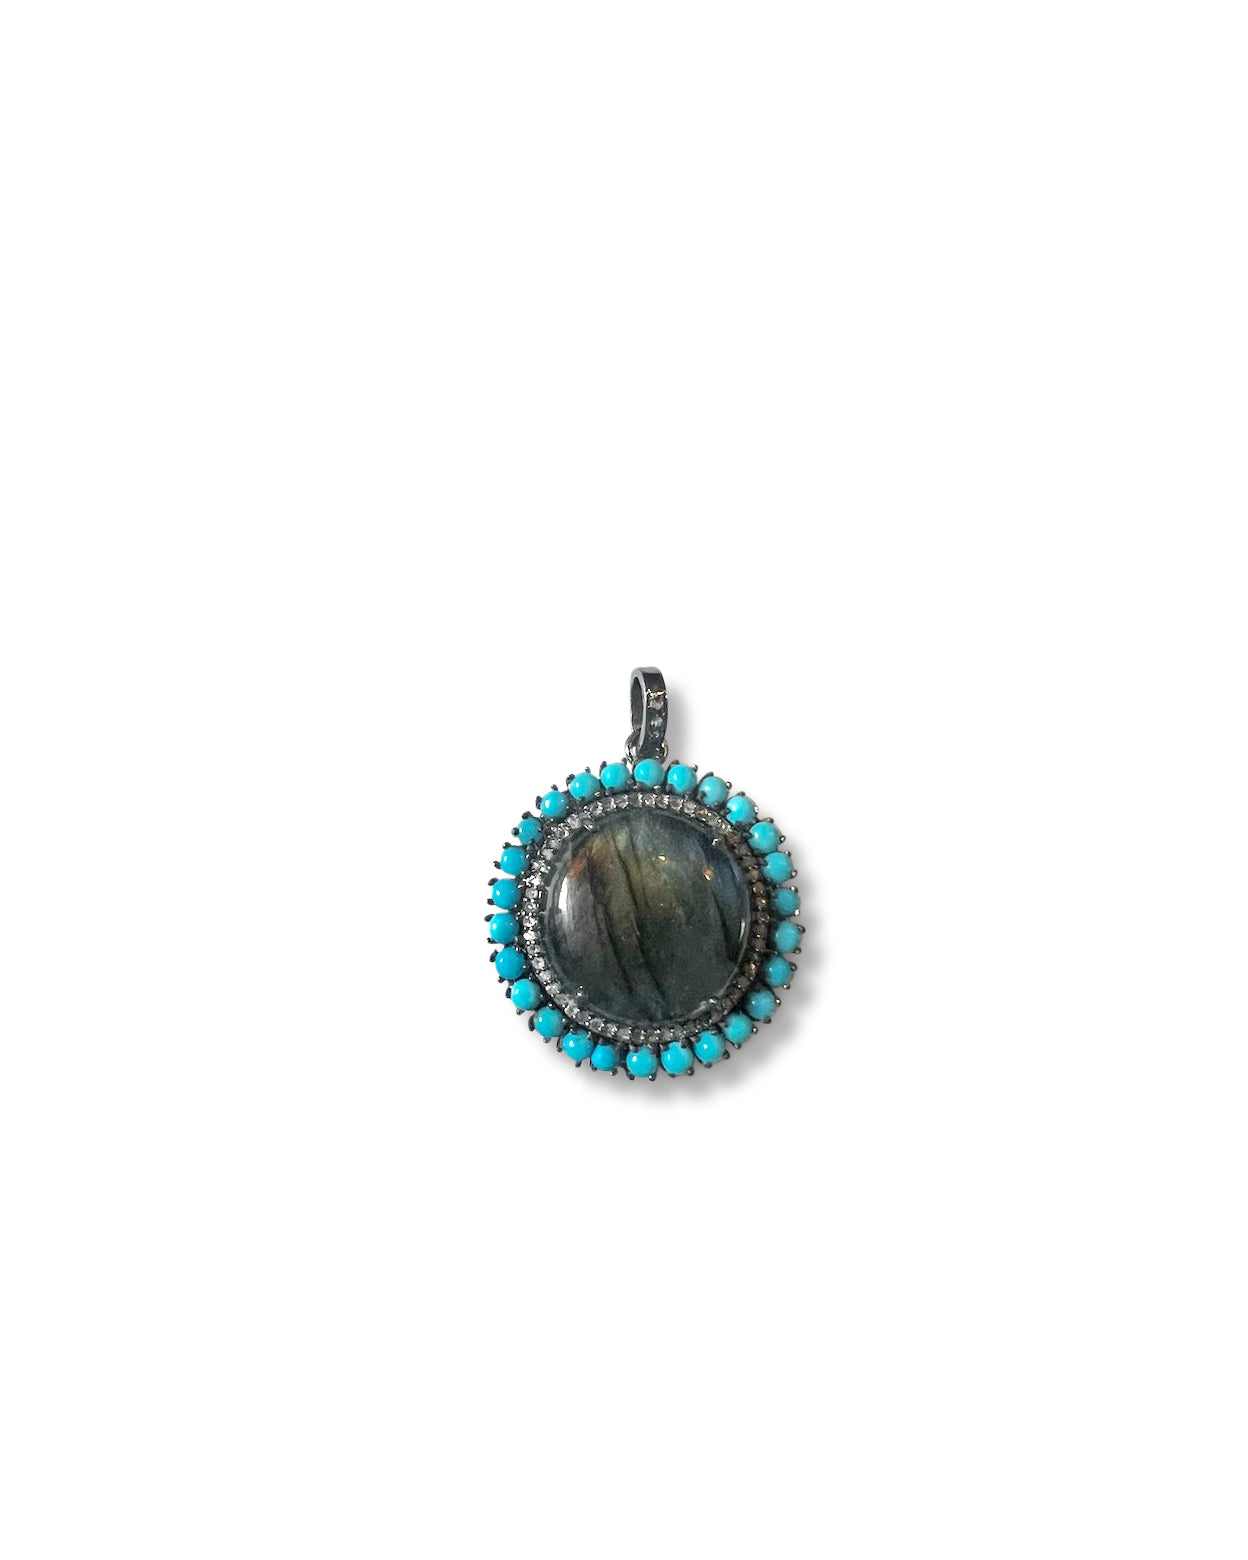 Labradorite set in Sterling Silver with Pave Diamonds and Turquoise